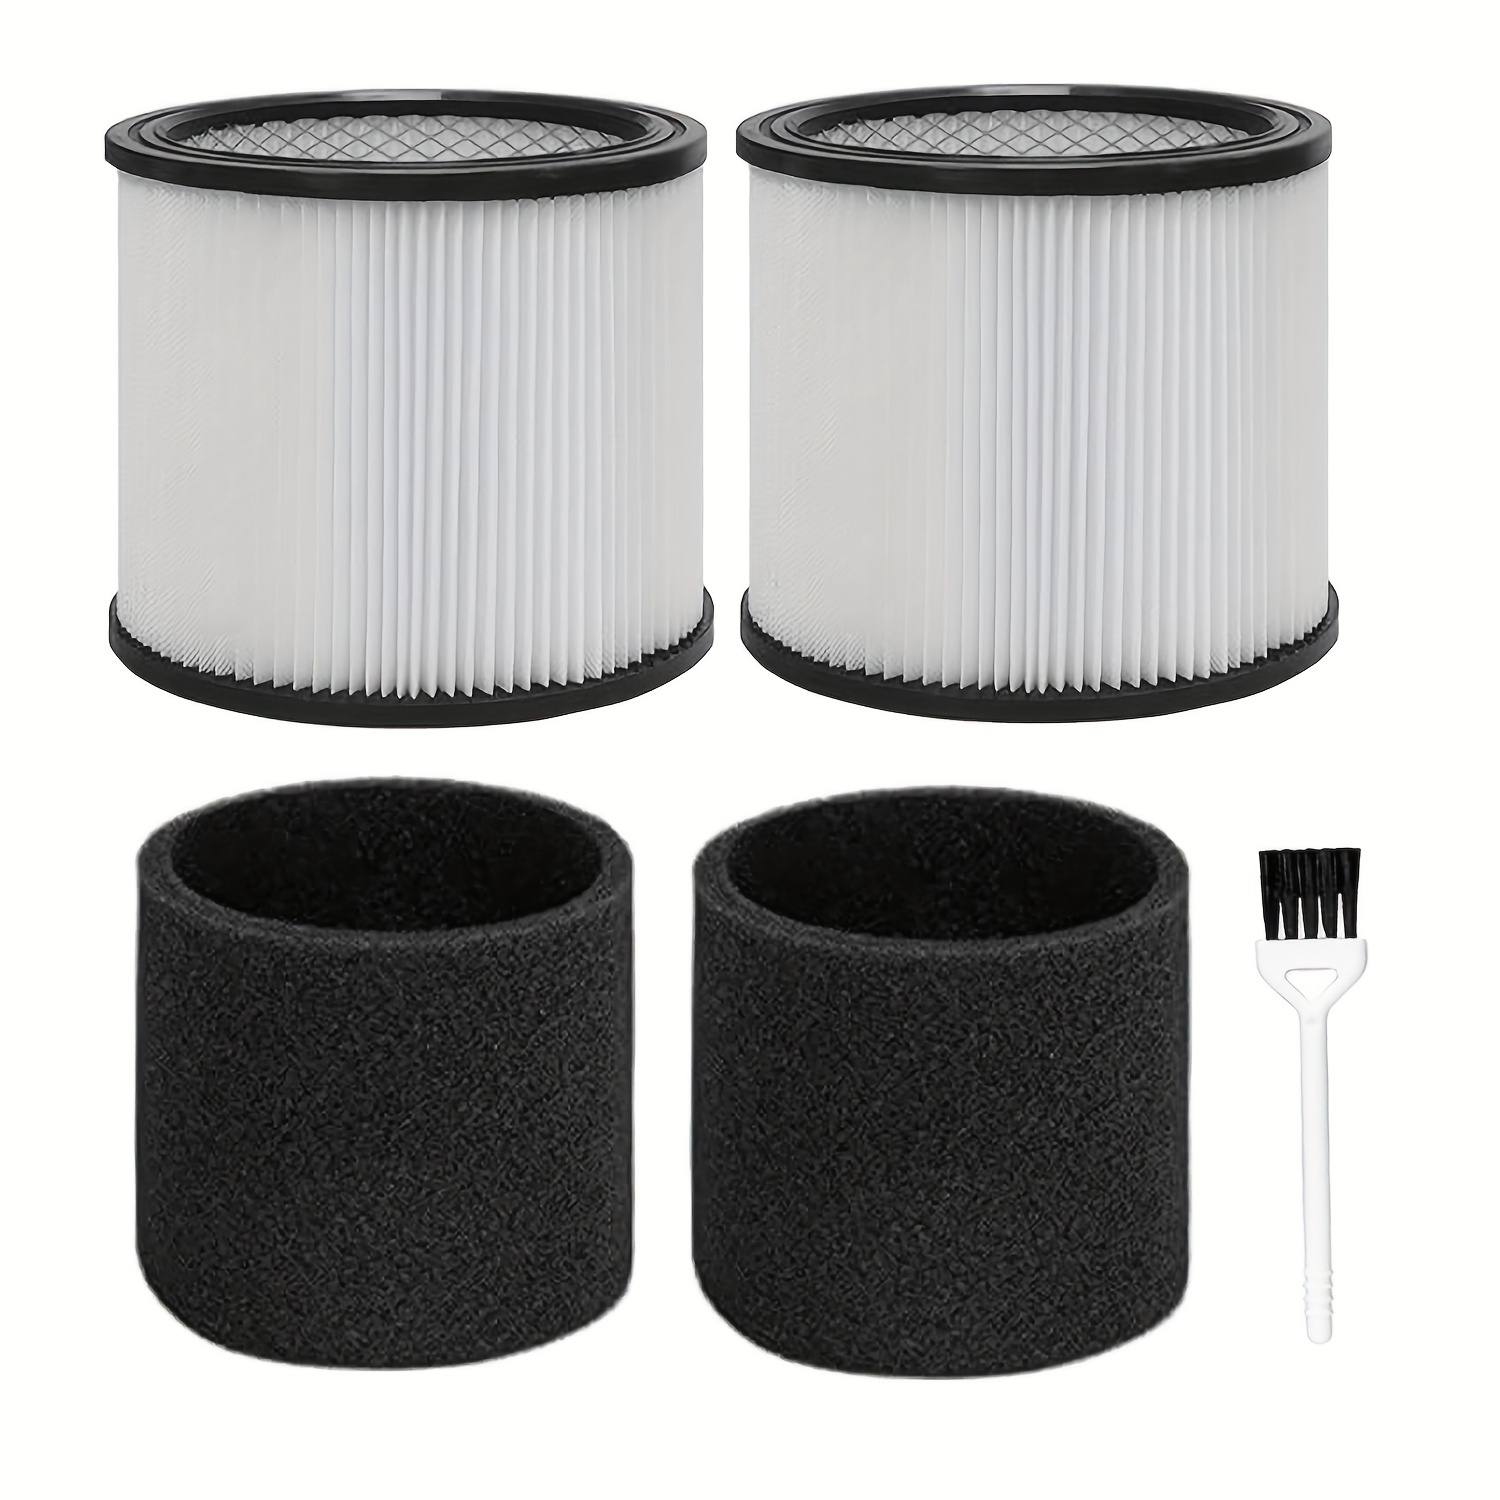  2Pcs Cartridge Filter Compatible with Karcher Wd2.200